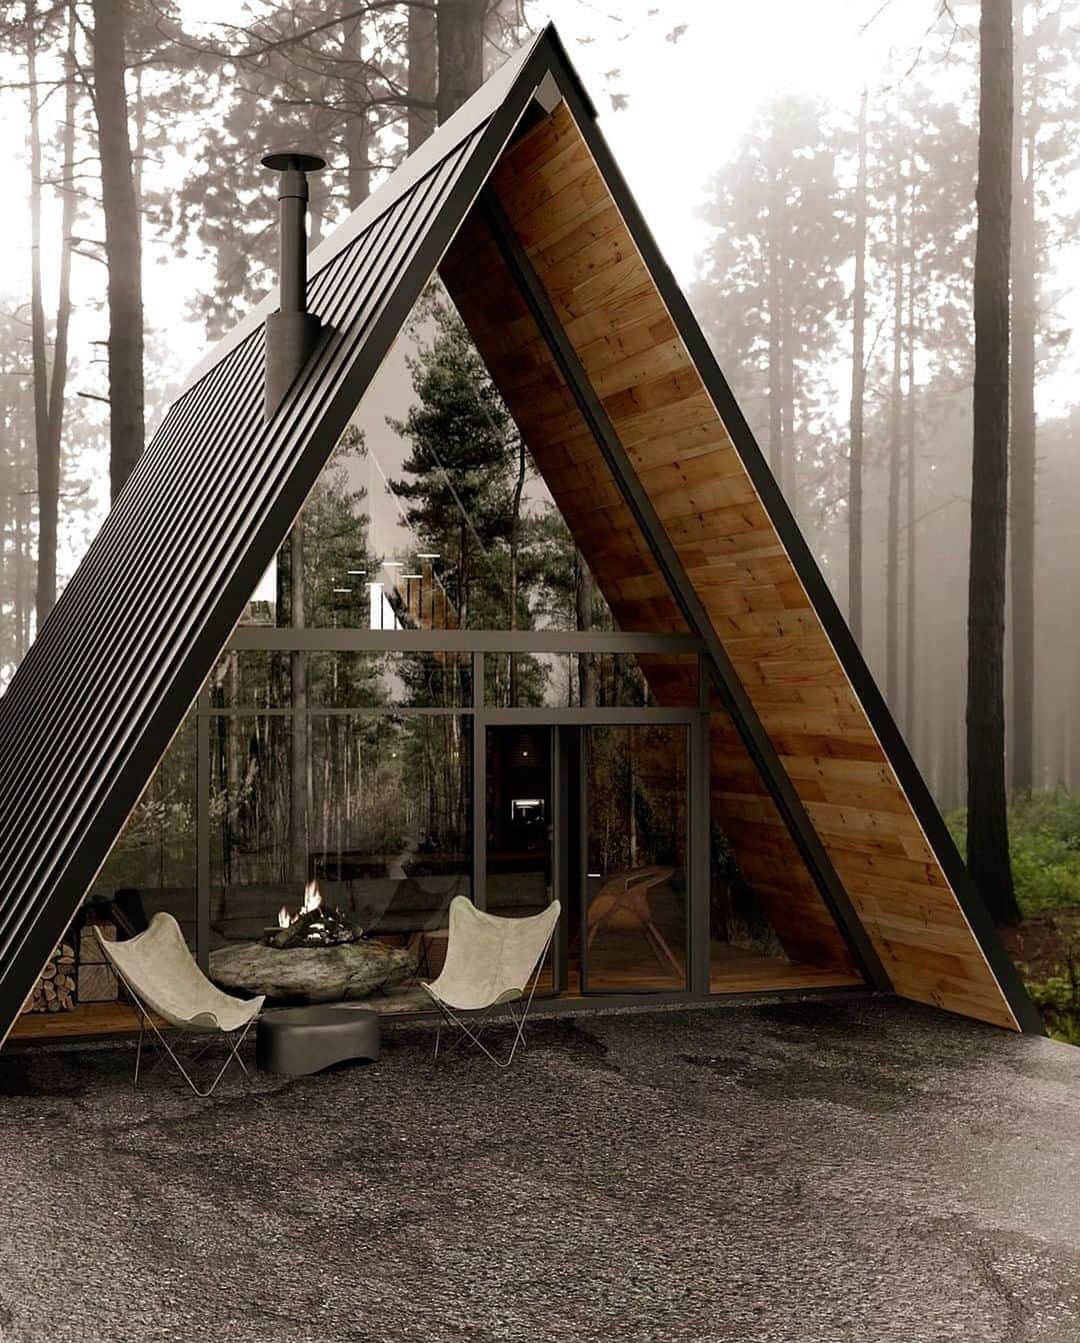 Architecture - Housesのインスタグラム：「⁣ 𝐐𝐮𝐢𝐞𝐭 𝐒𝐩𝐚𝐜𝐞 𝐇𝐨𝐮𝐬𝐞⁣ 'After Rain Cabin', located in the forest to relax while enjoying nature 🥰. A place thought to be a private residence and design in wabi sabi style 🤩. Do you like it? Tag a friend for inspo 👇⁣ _____⁣⁣⁣⁣⁣⁣⁣⁣⁣ 📐 💻  @yana_design_home  📍 Lake Tahoe, California⁣ #archidesignhome⁣⁣⁣⁣⁣ _____⁣⁣⁣⁣⁣⁣⁣⁣⁣ #architecture #architect #arquitectura #architettura #interiordesign #archilovers #architecturephotography #amazingarchitecture⁣⁣ #archilovers #allofrenders #architecht #aallofarchitecture #visualization #3dsmax #3dvisualization #wabisabi #wabisabistyle #design_only #dream_image #designprojects #renders」